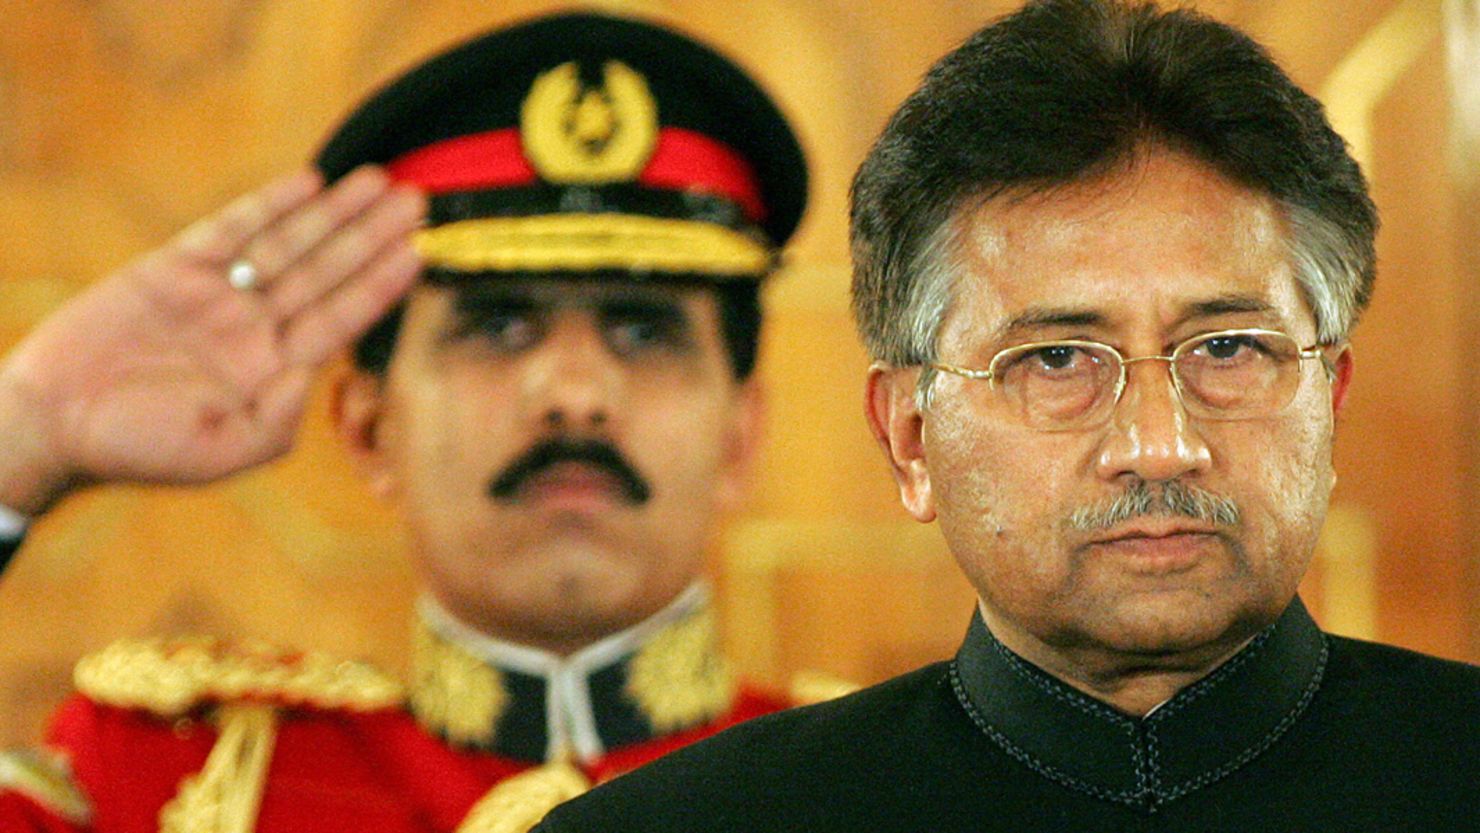 Former Pakistani President Pervez Musharraf has been living in London and Dubai since resigning in 2008.